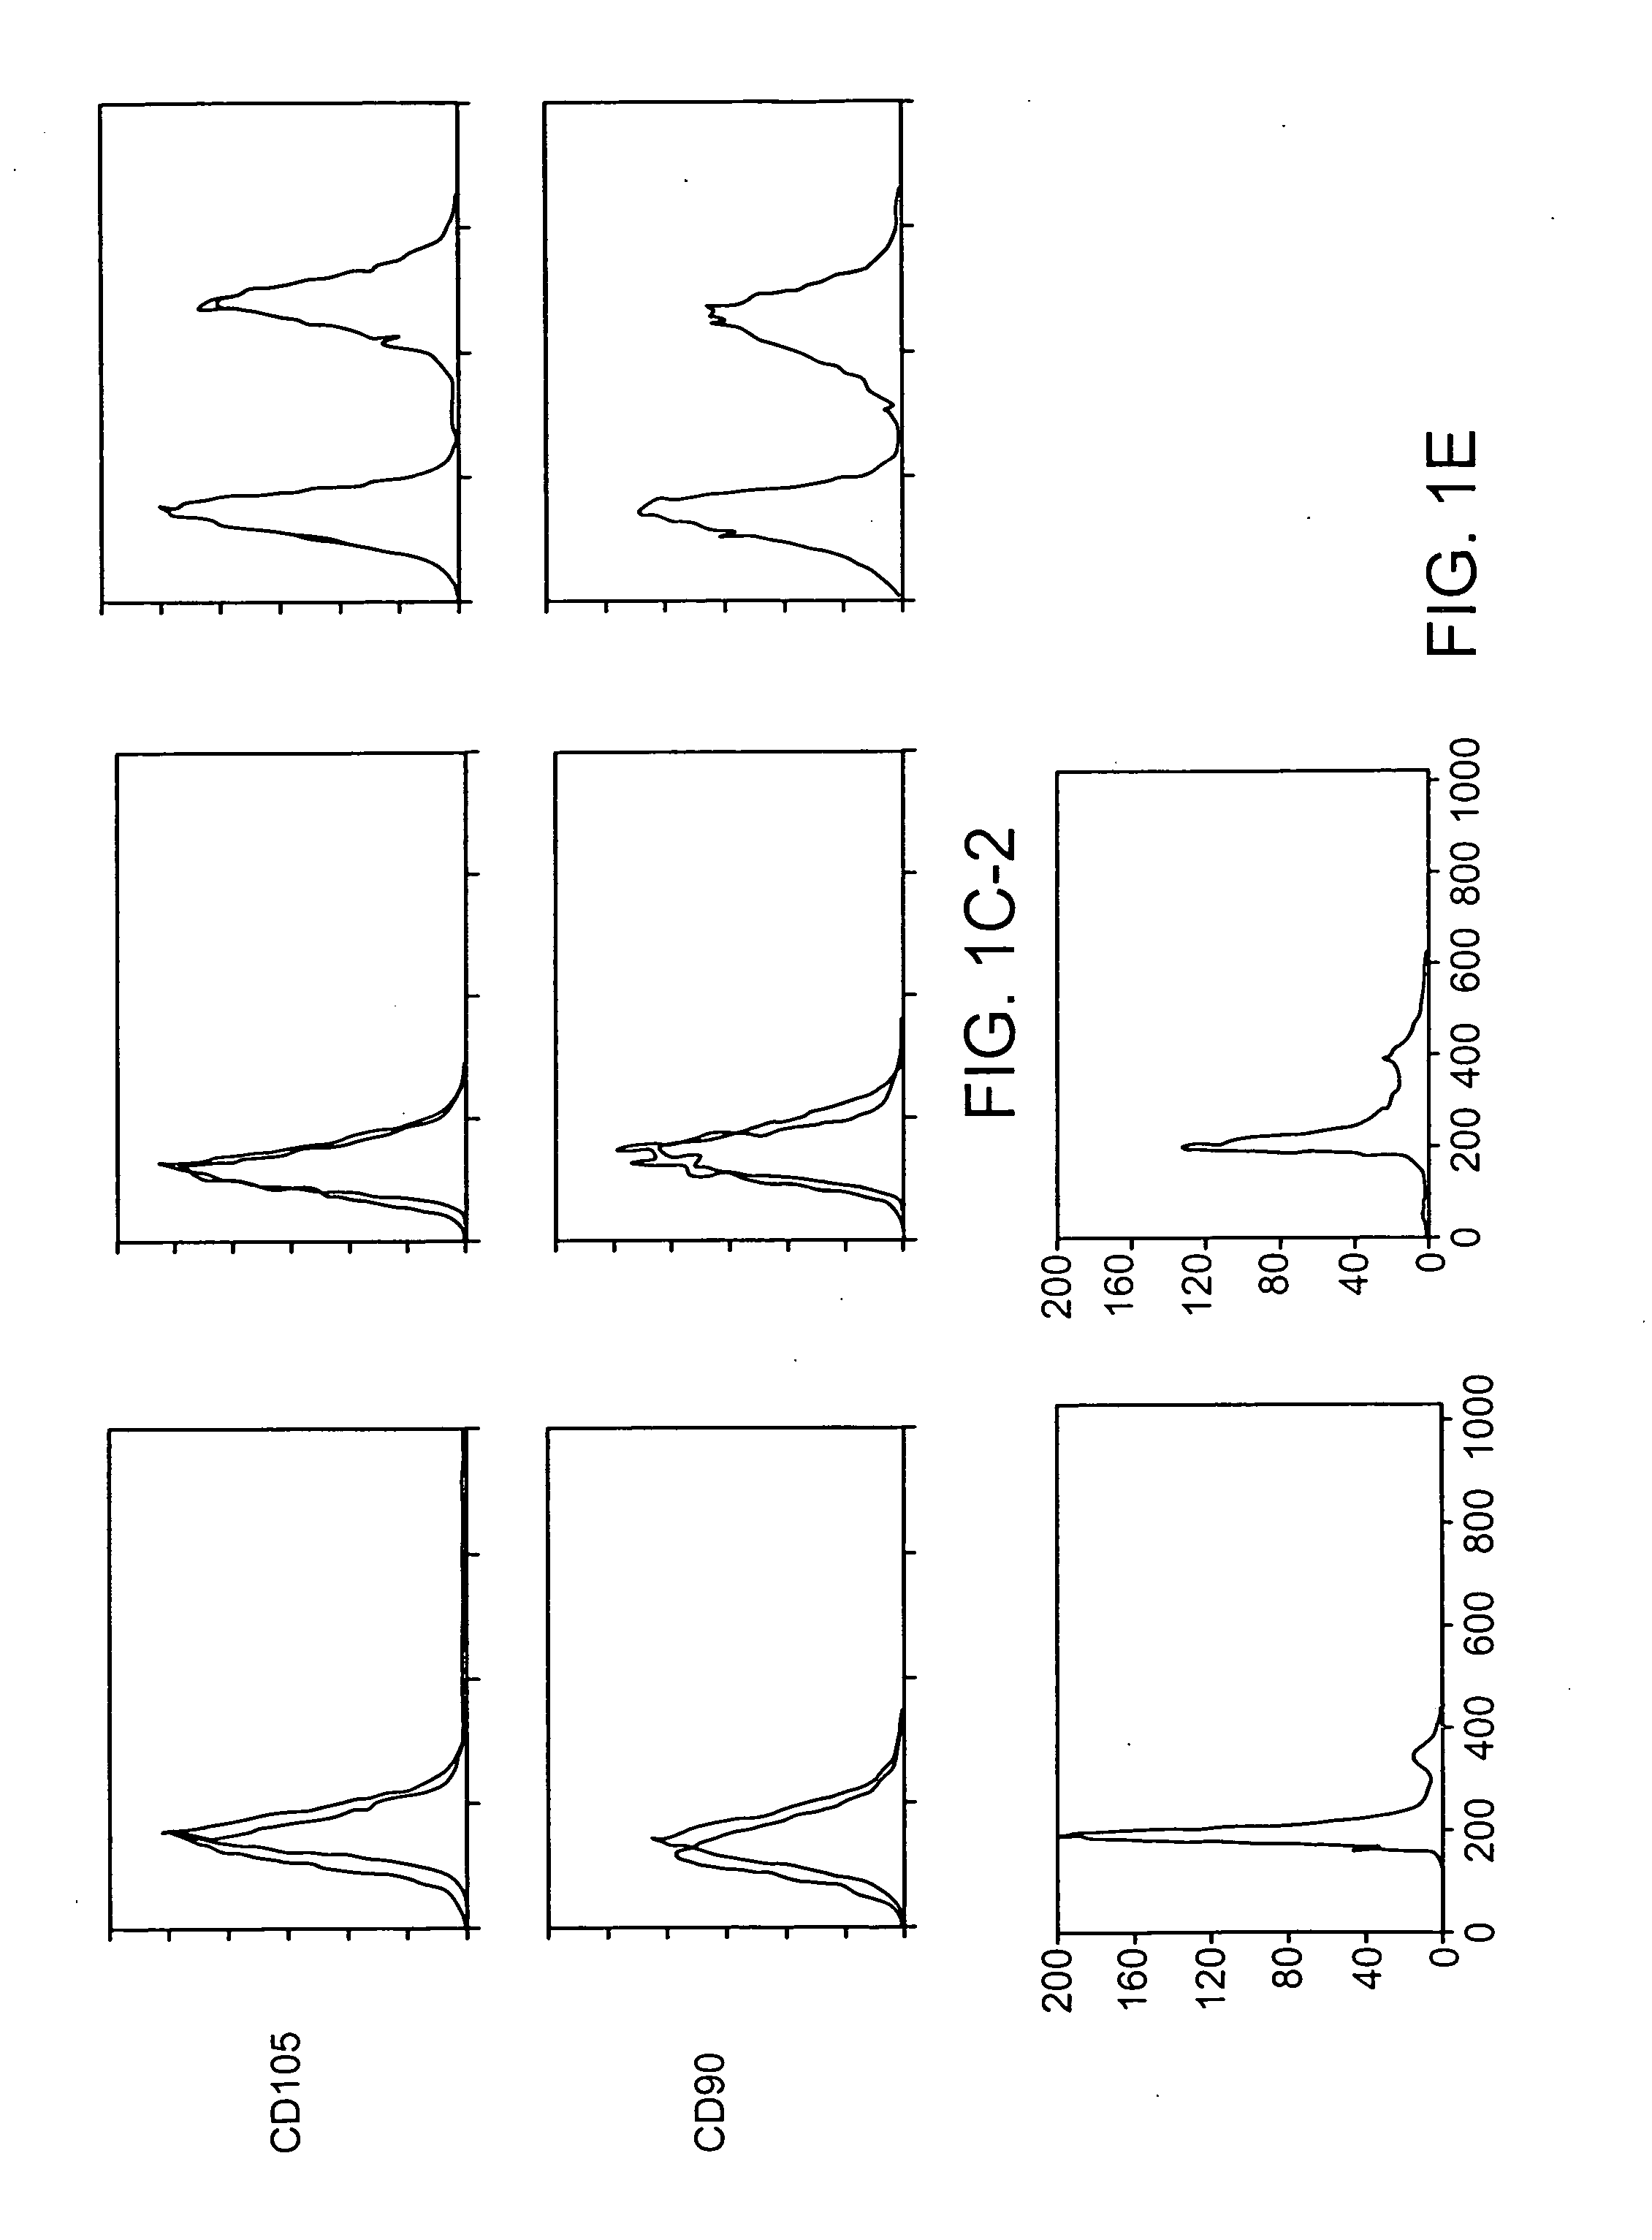 Novel multipotent stem cells and use thereof